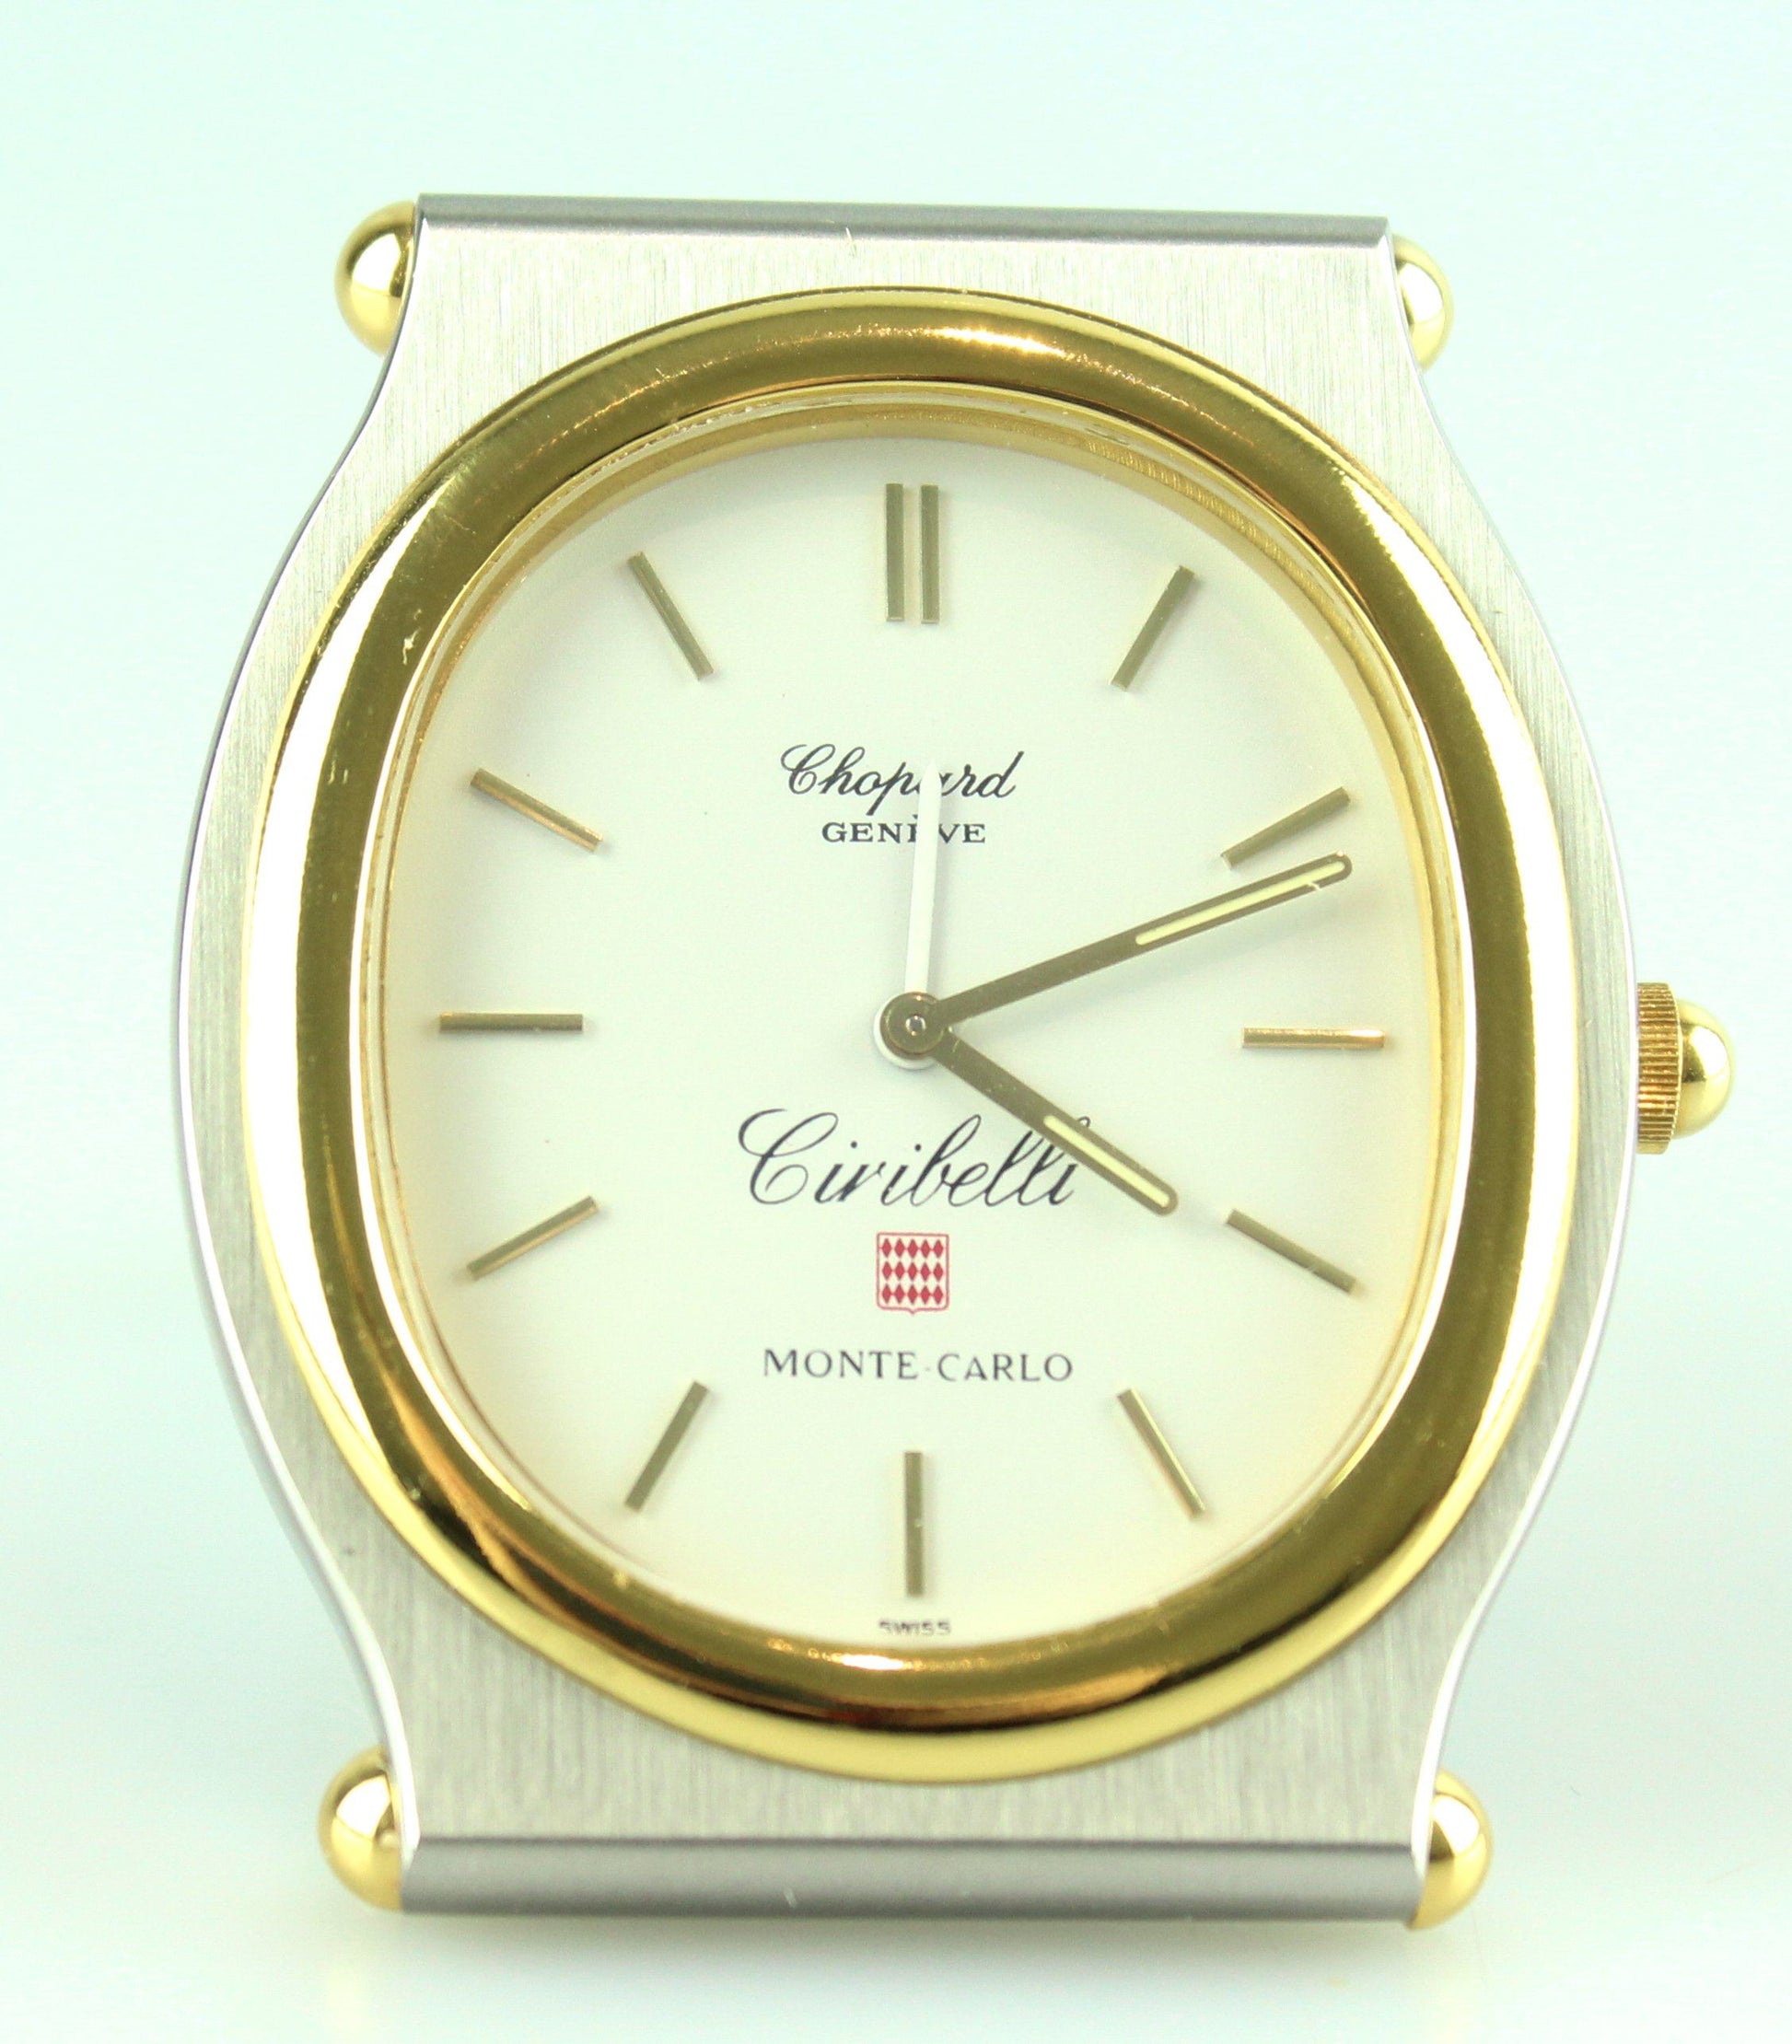 Chopard Monet Carlo Mini Gold And Brushed Steel Travel Alarm Clock watches Chopard 